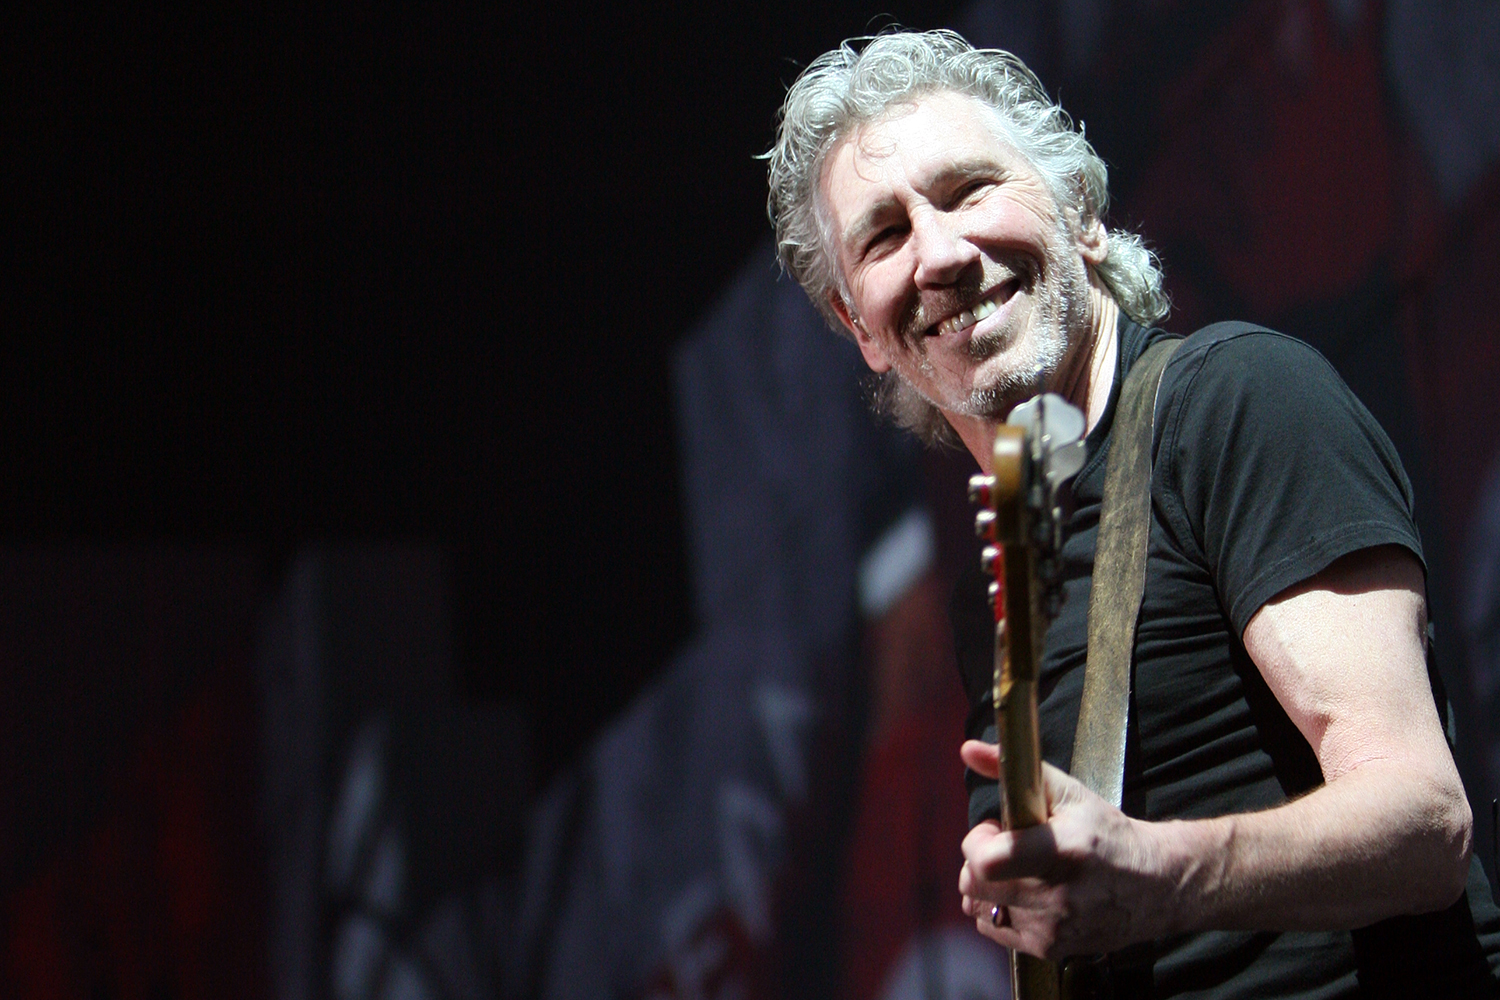 The Audiophile Roger Waters